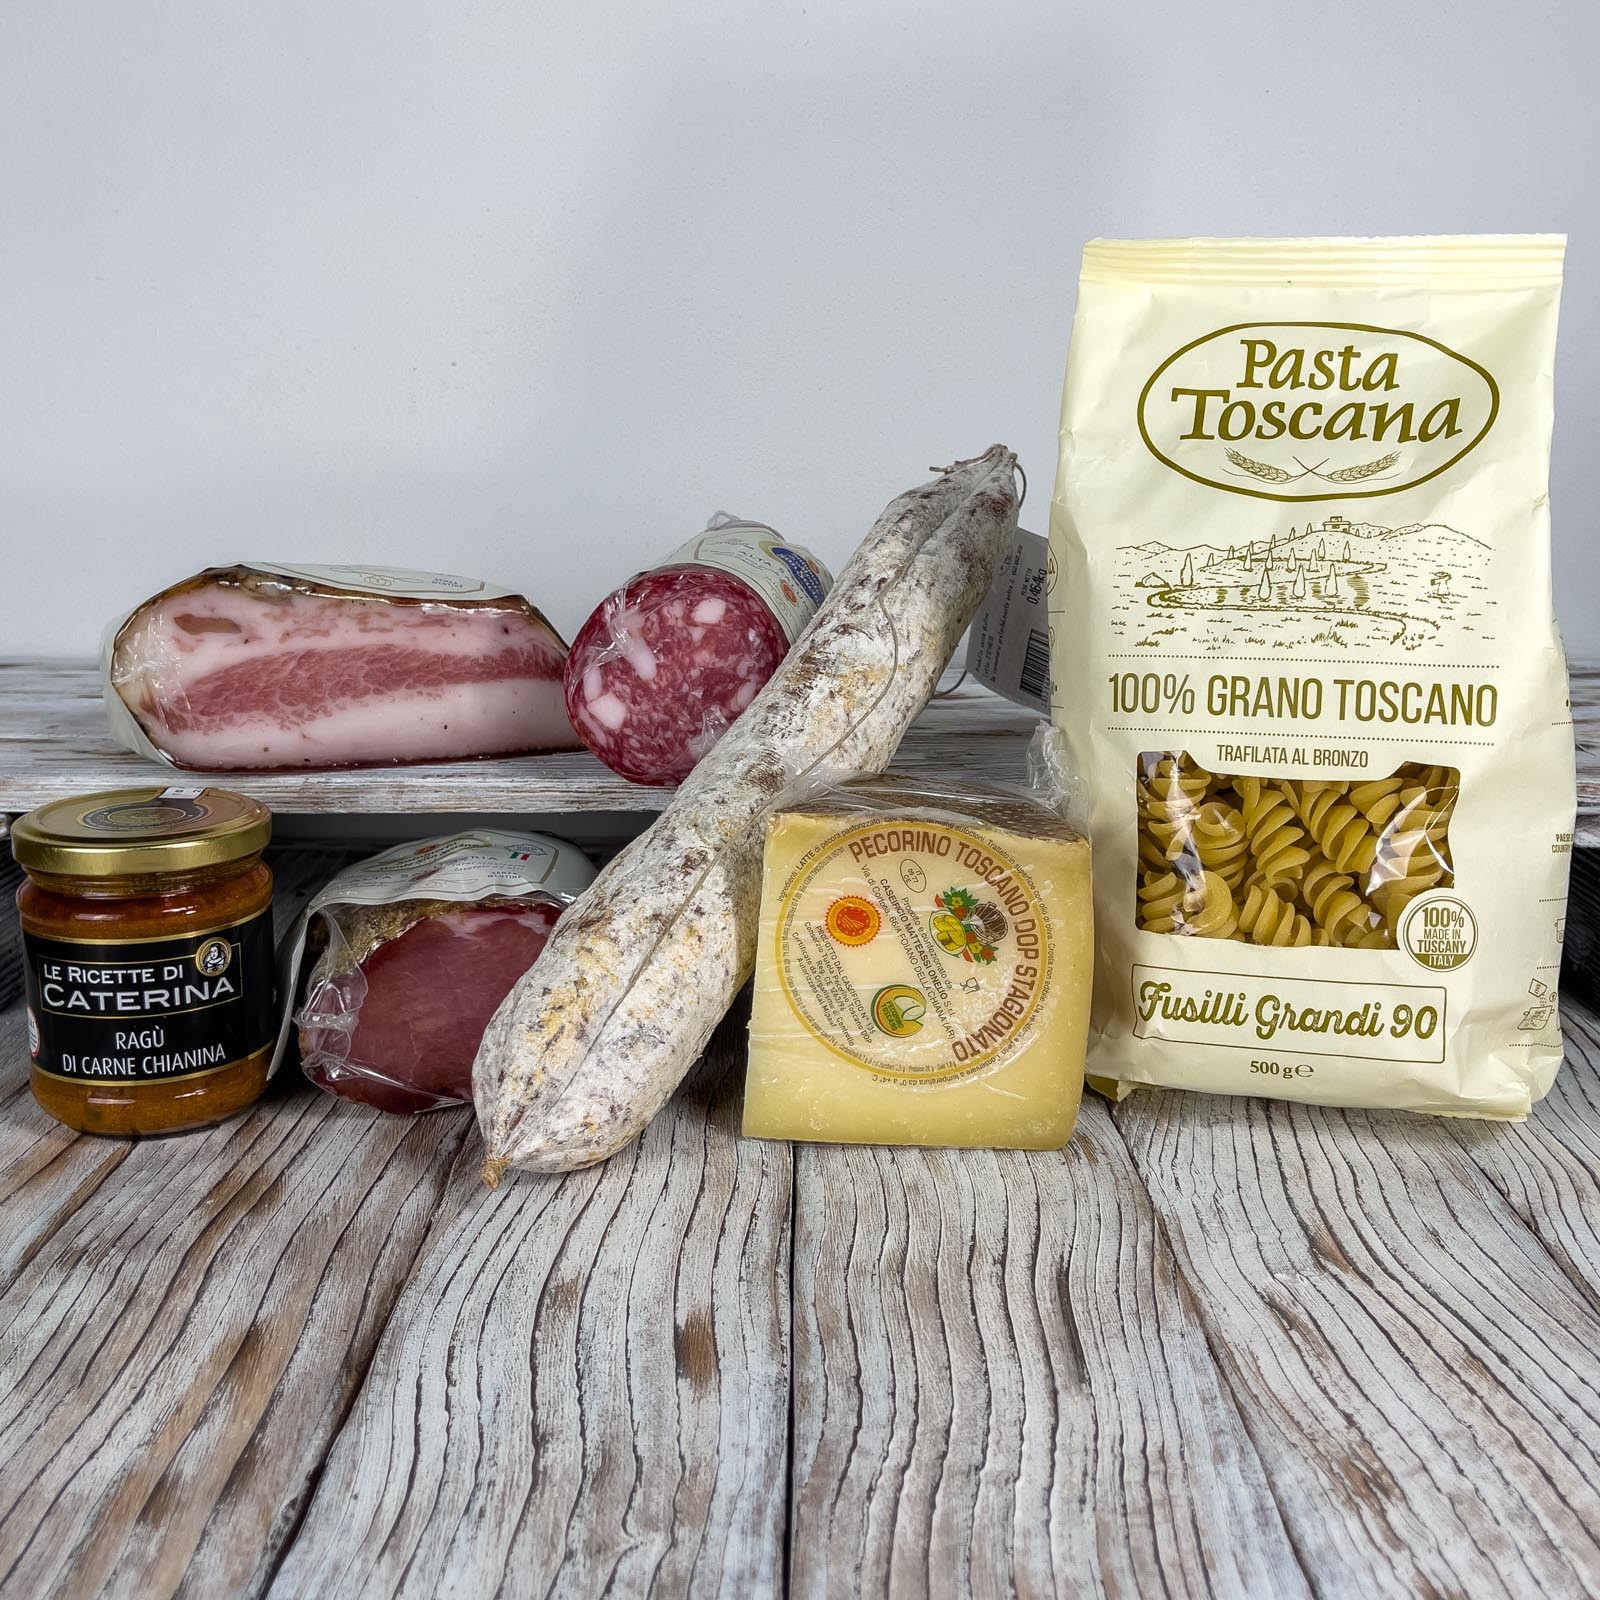 The Tasting Box - “Le Specialità” is made up of a selection of products for a total of about 3 kg. With the cured meats and cheeses present in the KingBox it is possible to prepare a typical Tuscan aperitif or appetizer and a first course based on Chianina Meat Sauce.